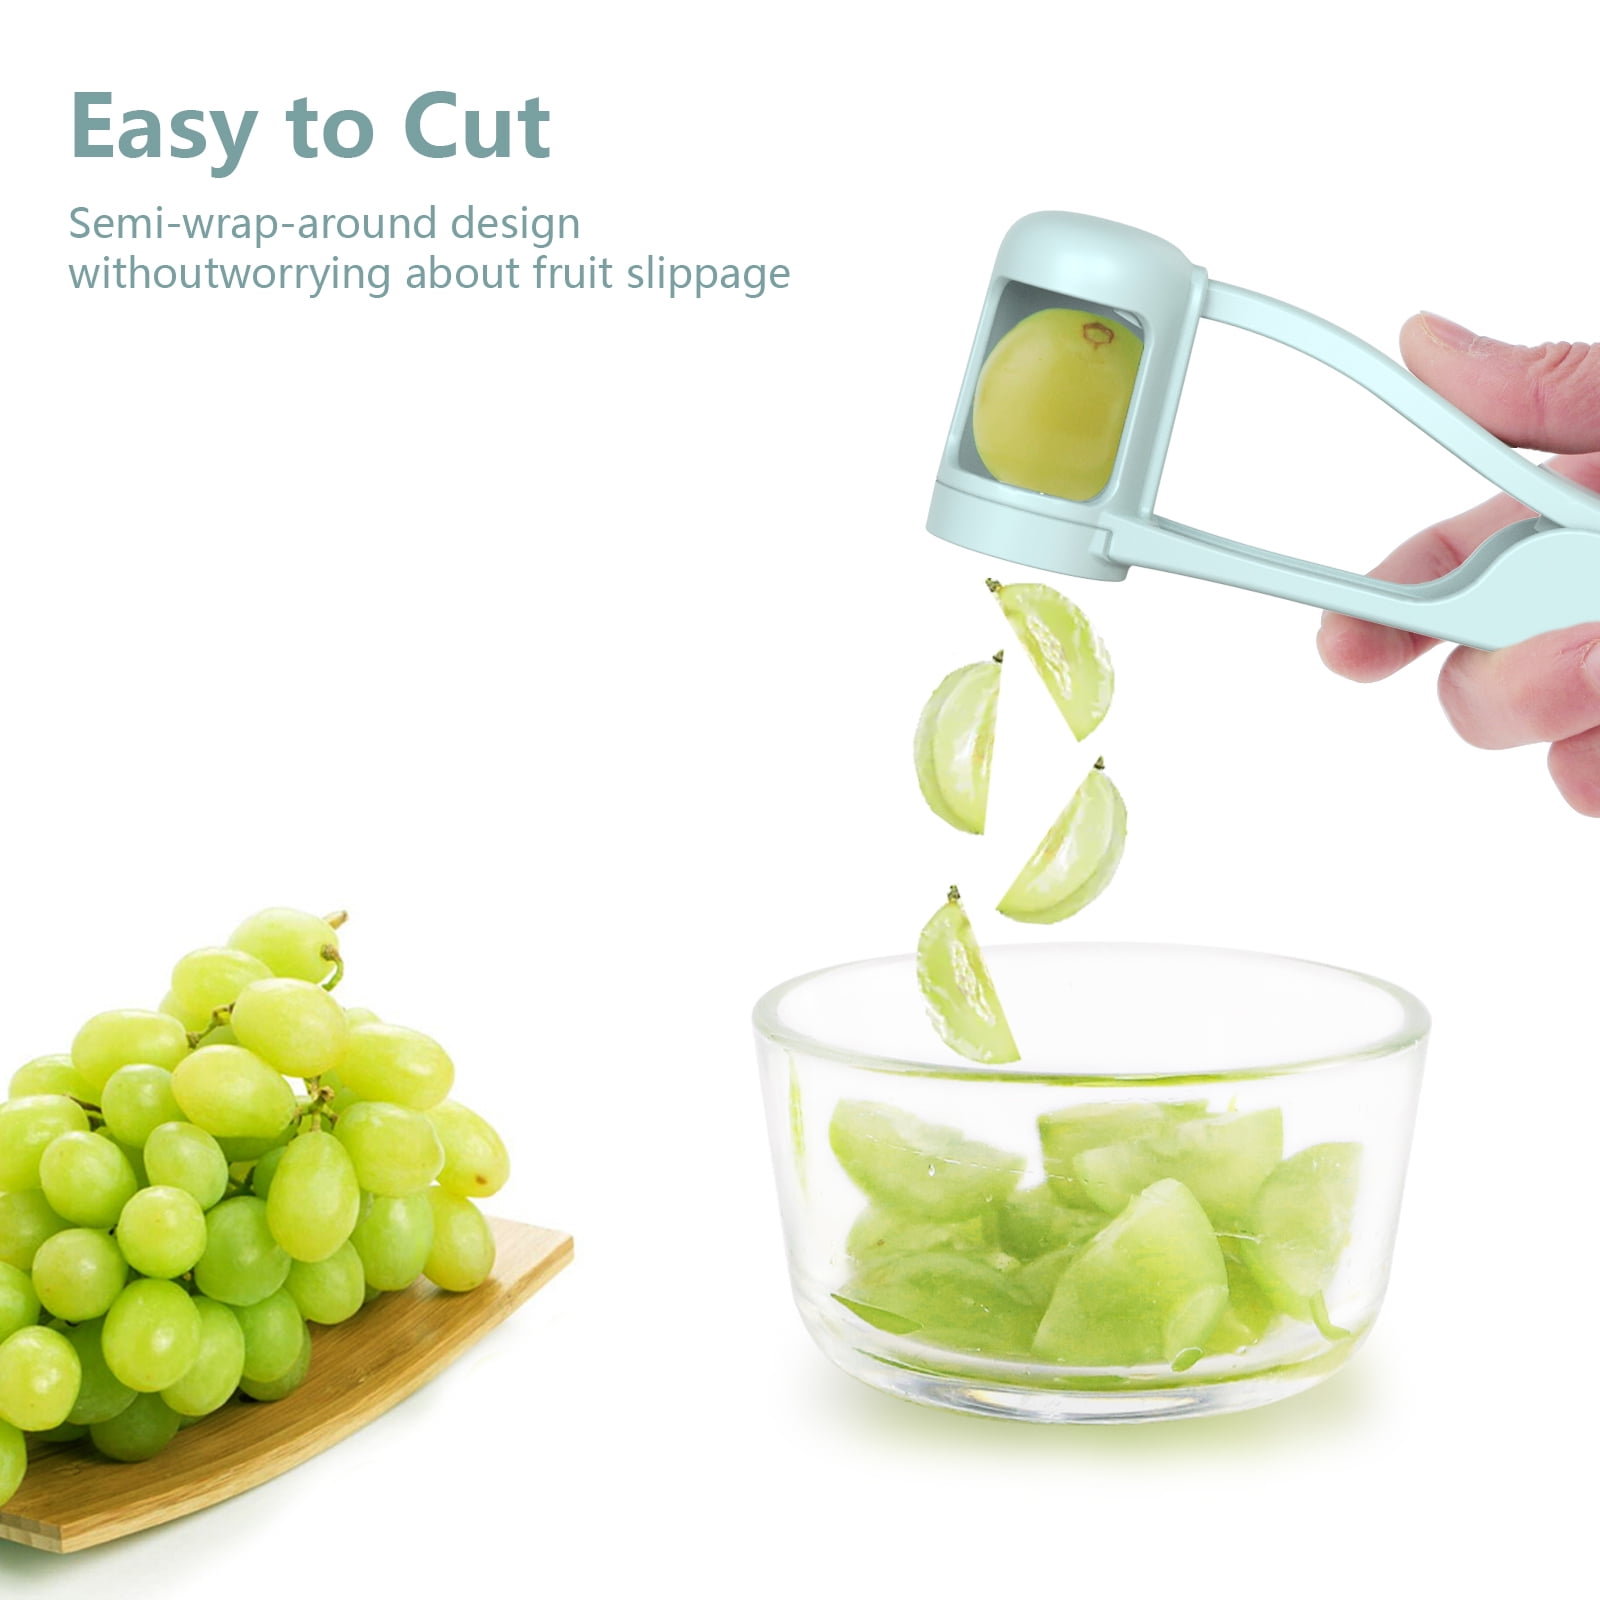 Cutting grapes in quarters, the EASY way with this grape cutter. Pop the  grape in, push and that's it! You have quartered grapes in just seconds.  🙌🏻